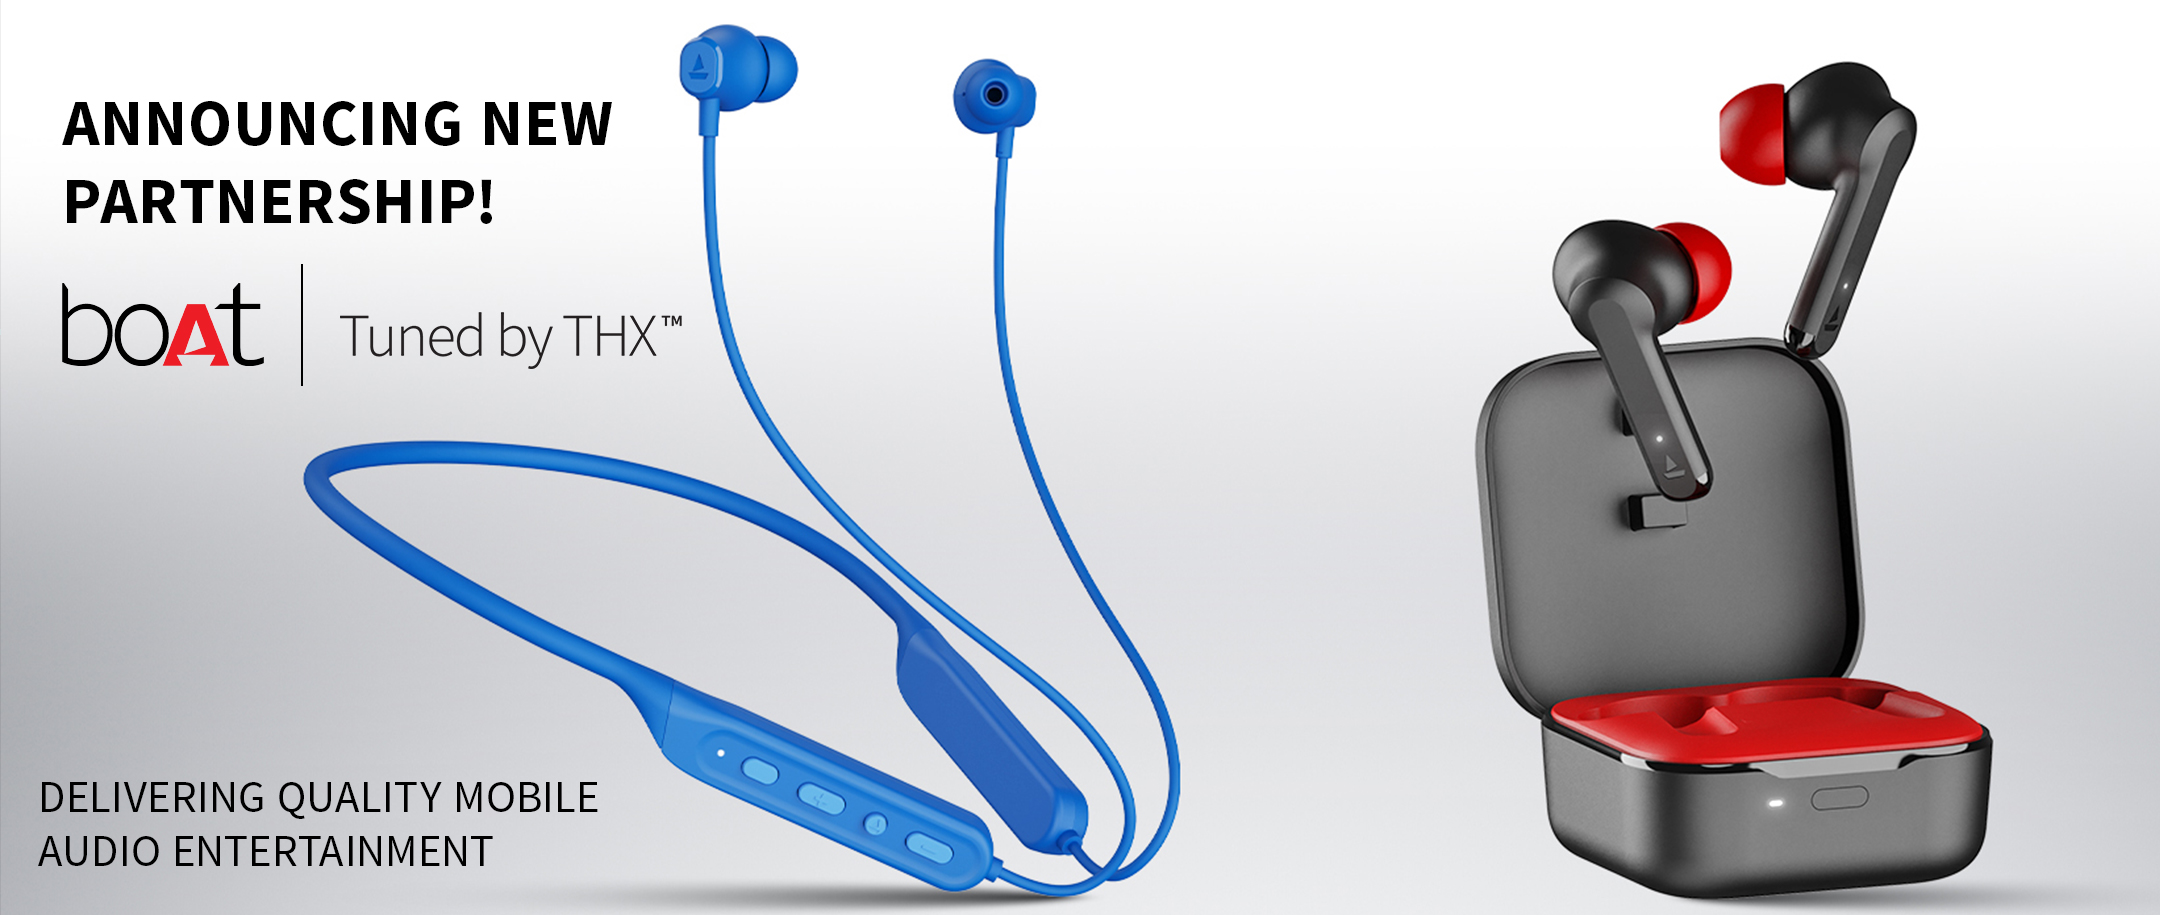 Tuned by THX boAt next-gen earbuds and headphones banner